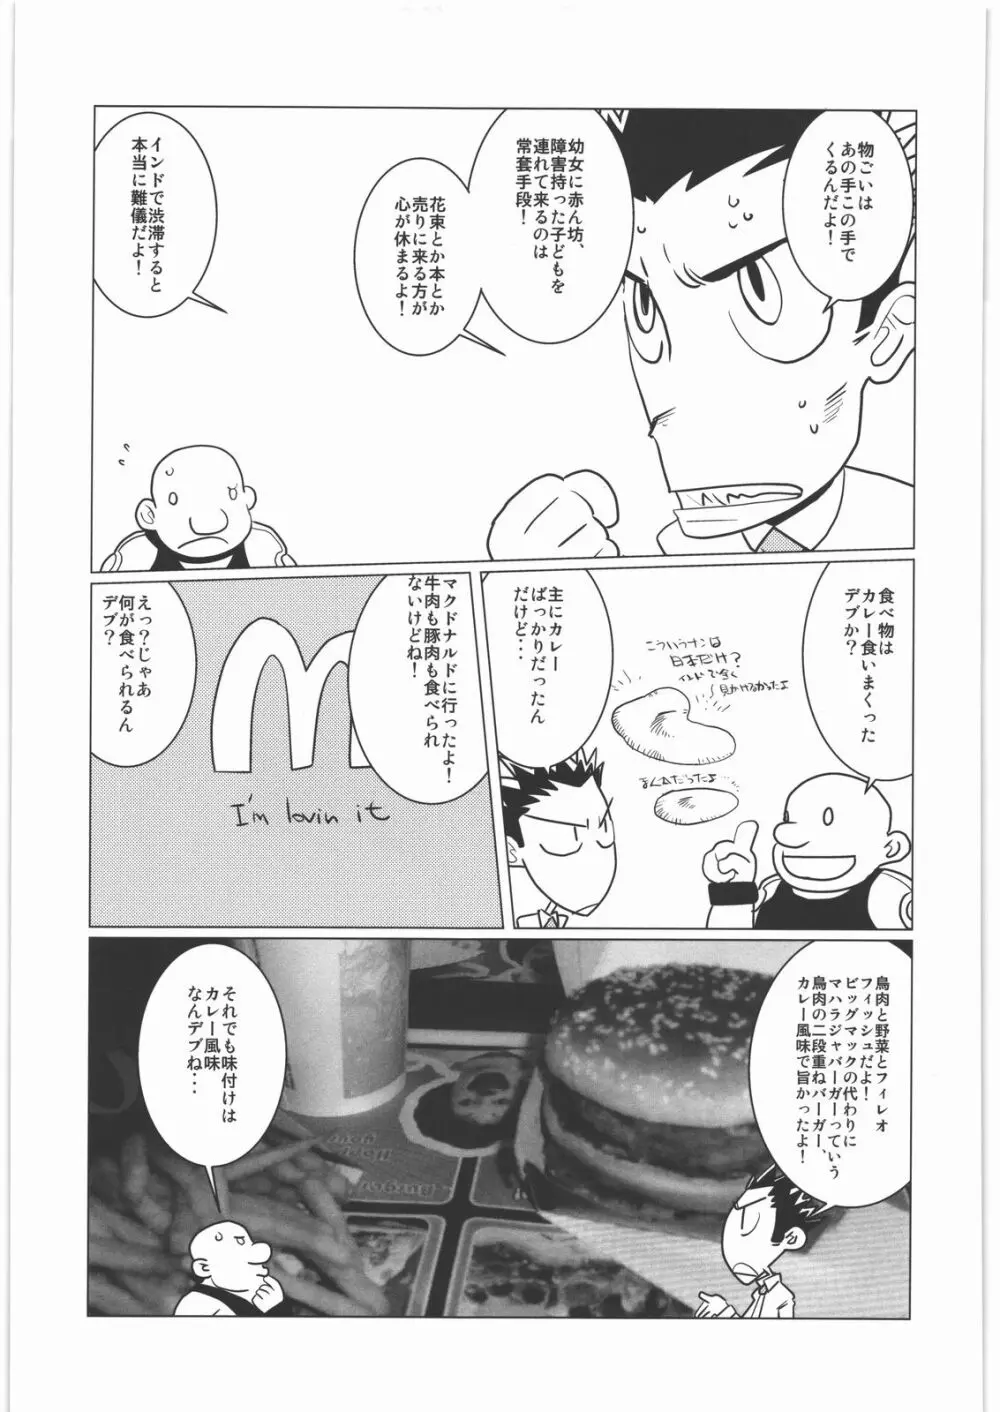 甲冑通信 弐之號 Page.52